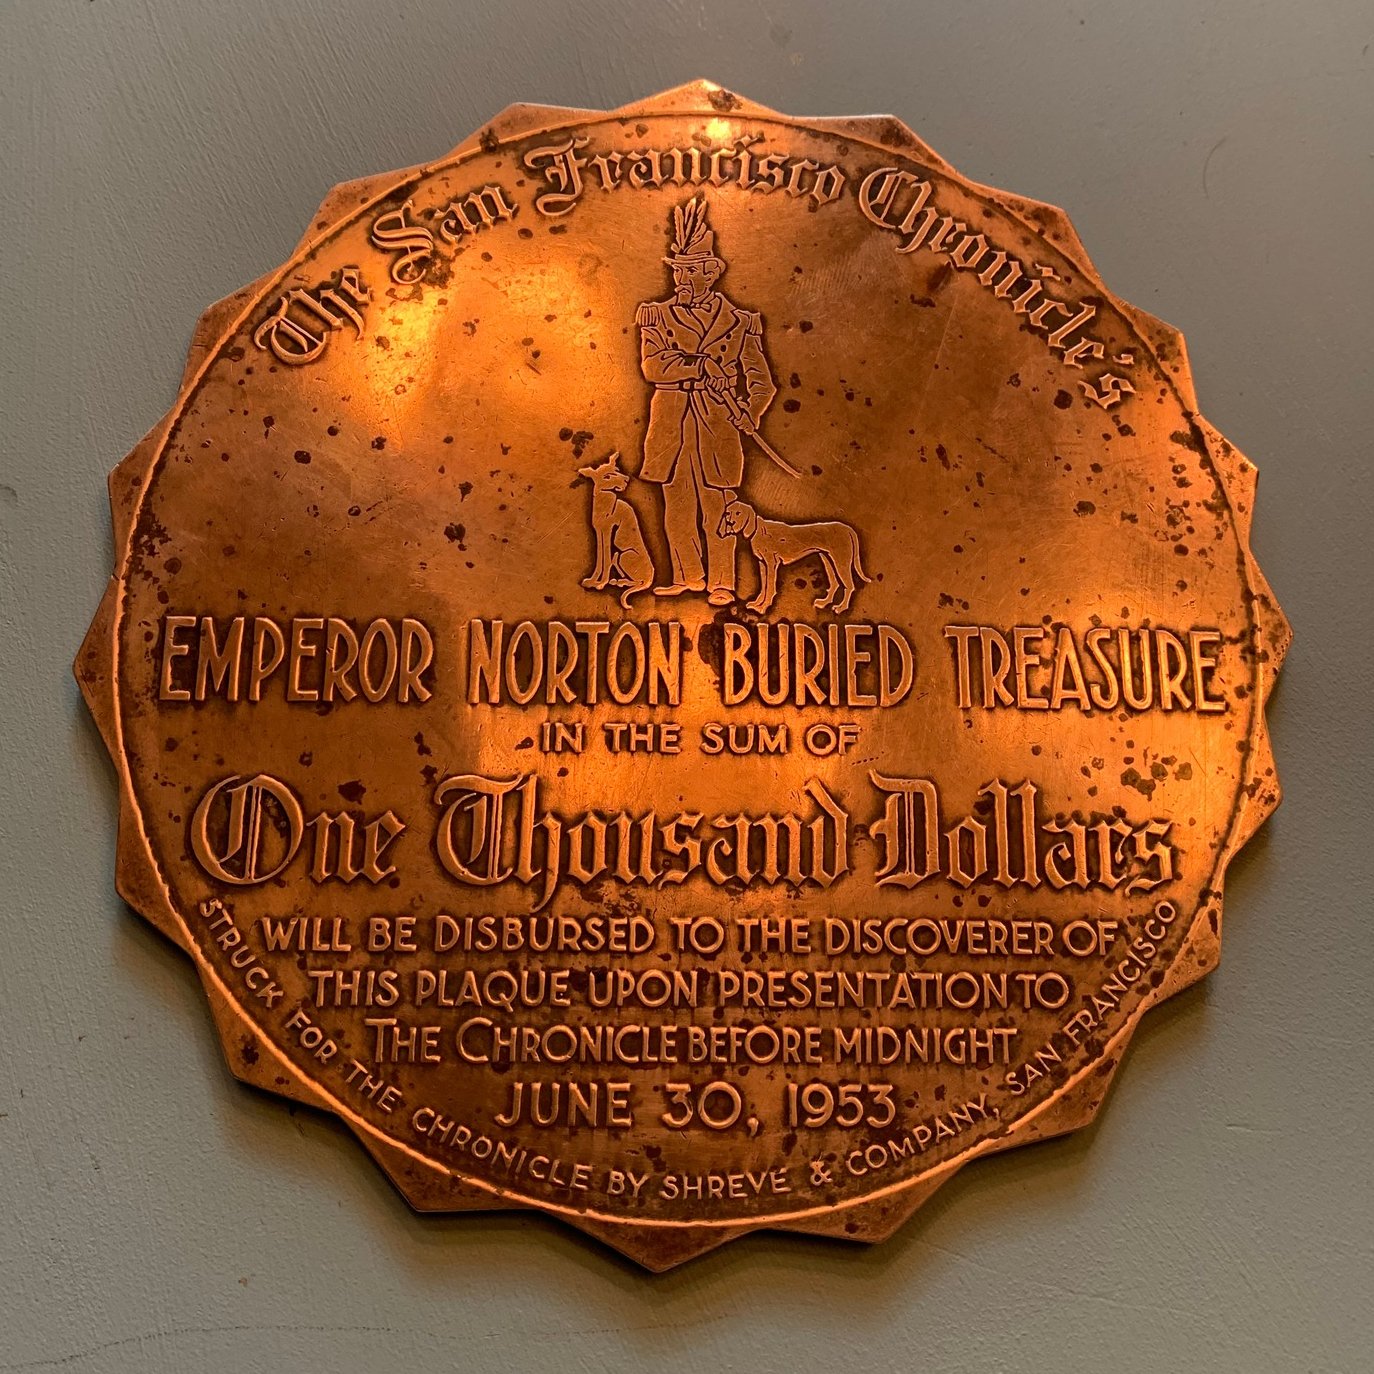   Medallion for Emperor Norton Treasure Hunt, 7” diameter, 1953.  Collection of Dan Sullivan. Photo: Dan Sullivan. For additional information and photographs, see The Emperor Norton Trust’s articles  here  and  here . [Added 3.29.2020; current photo 